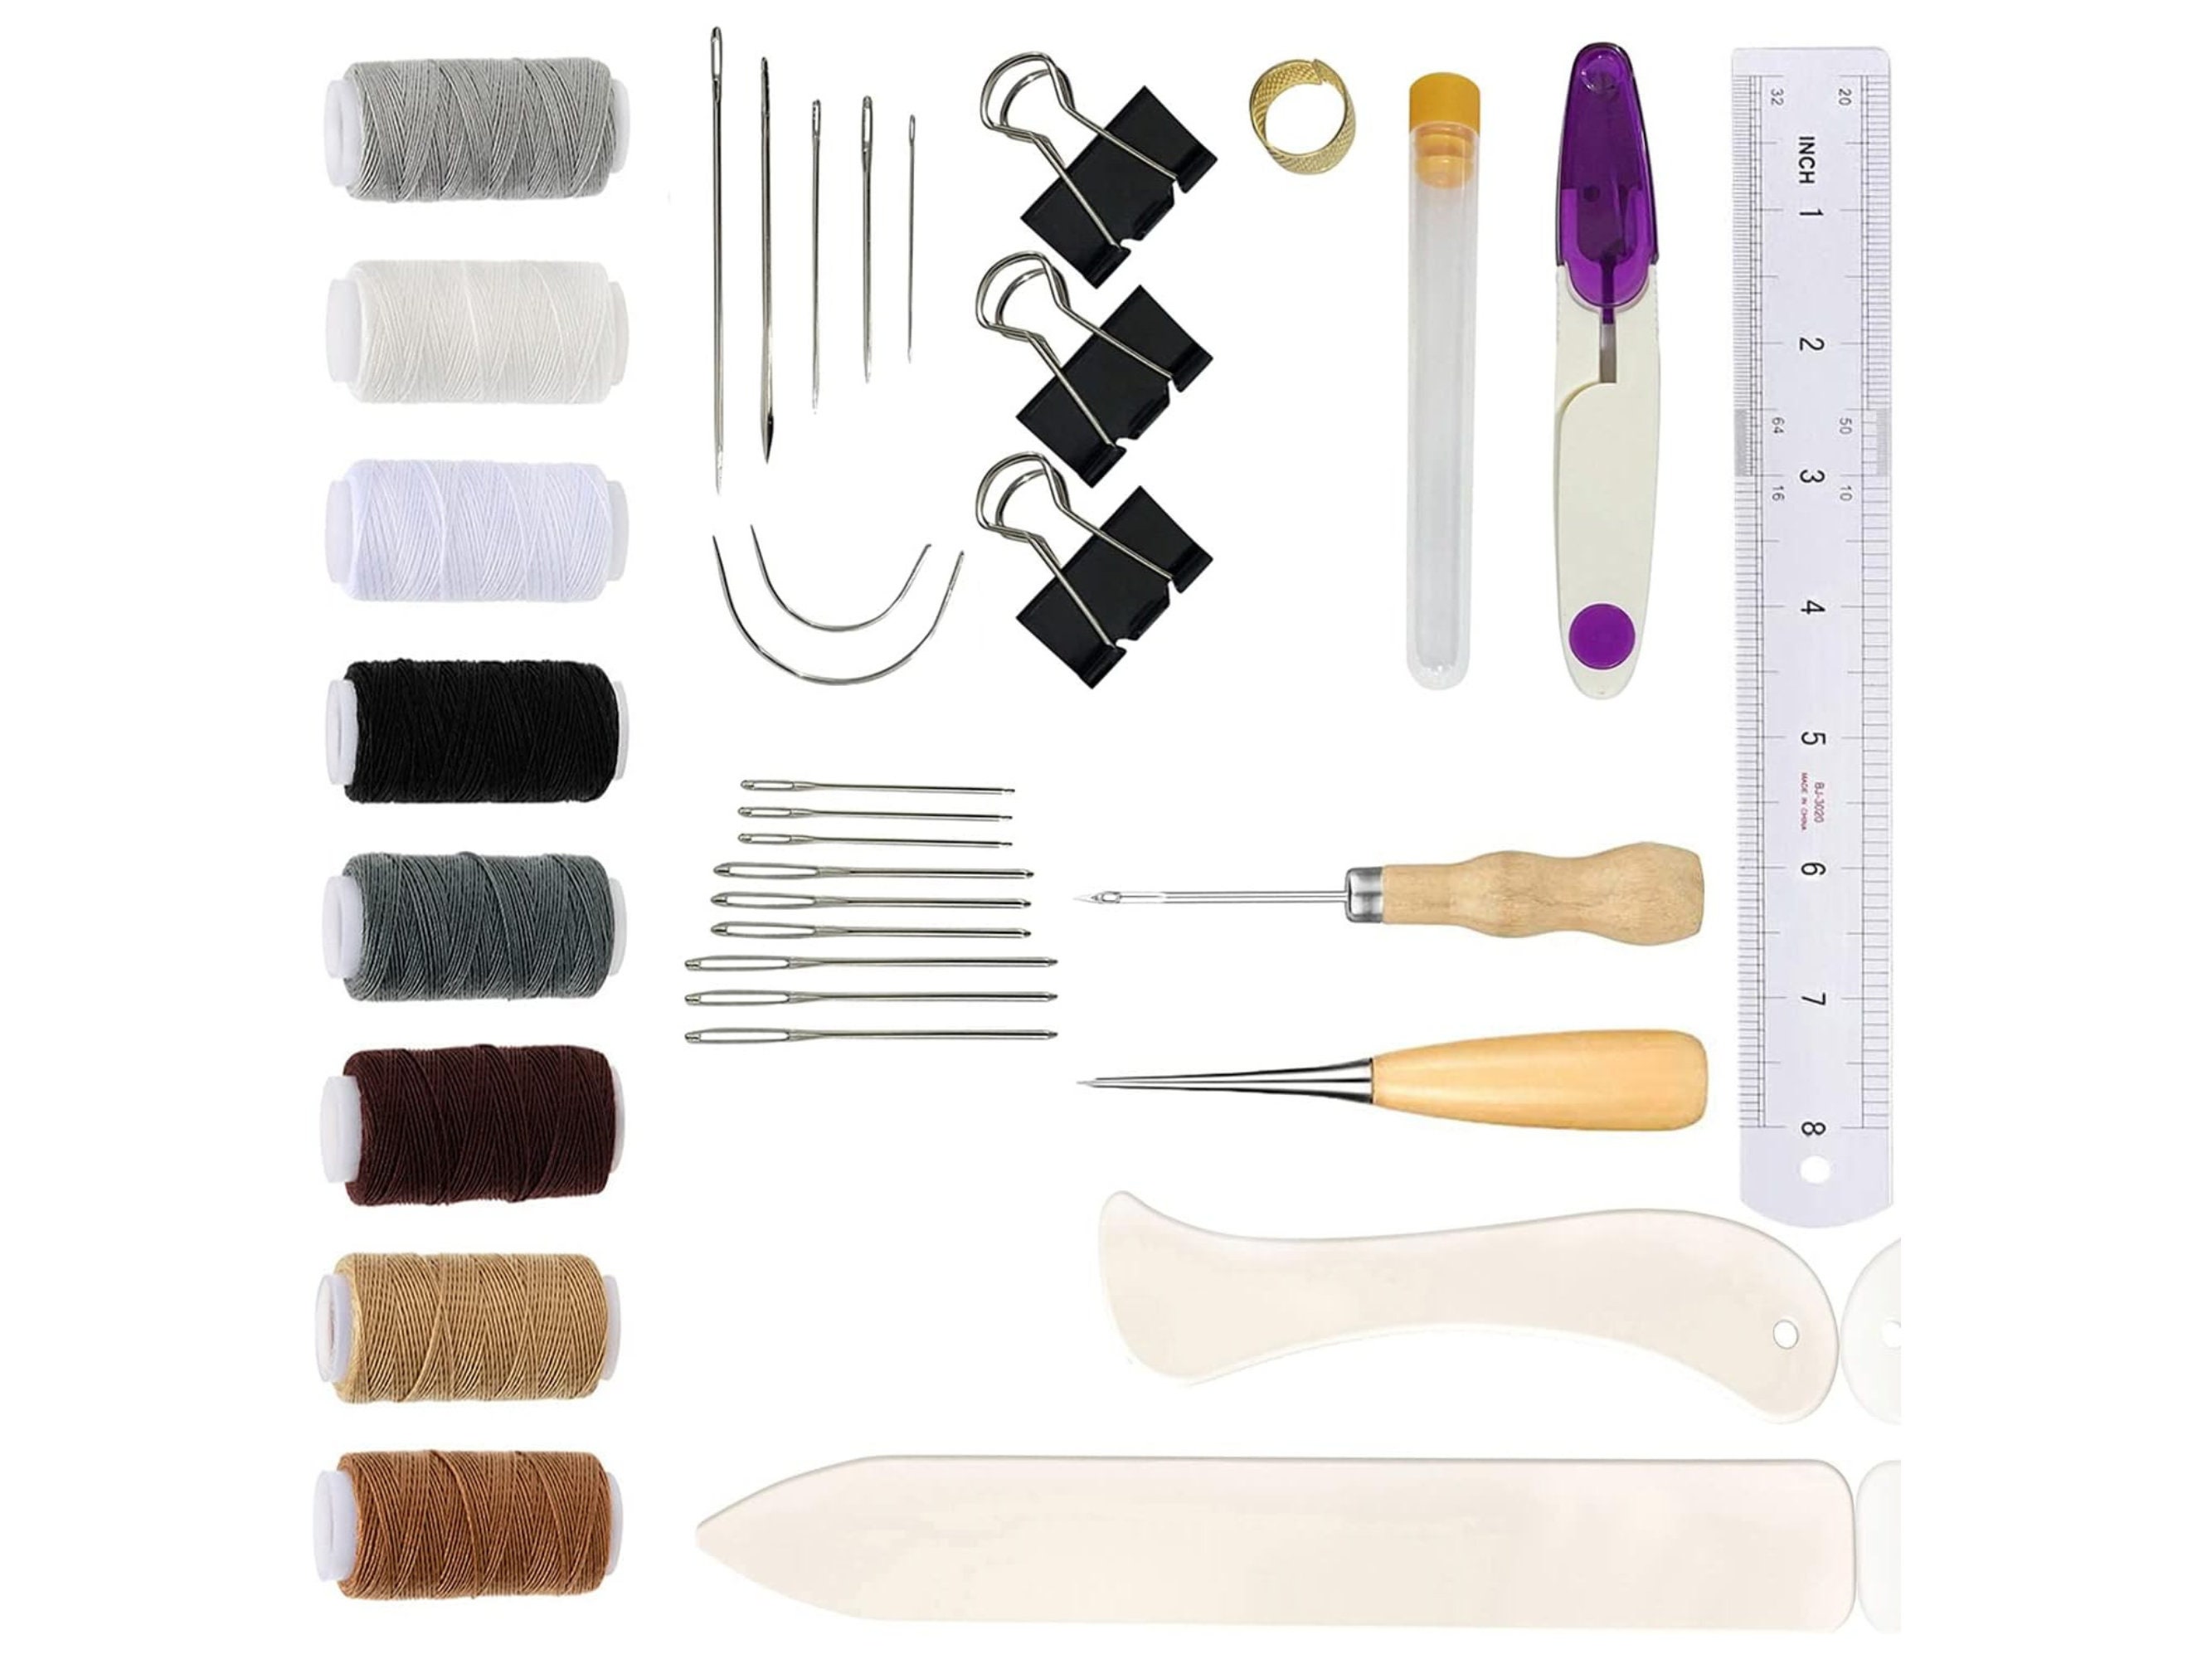 Bookbinding Tool Kit, Gift Set for Bookbinders, Booklover Tool Kit,  Essential Book Binding Supplies & Tools, DIY Journal Make Your Own Book 